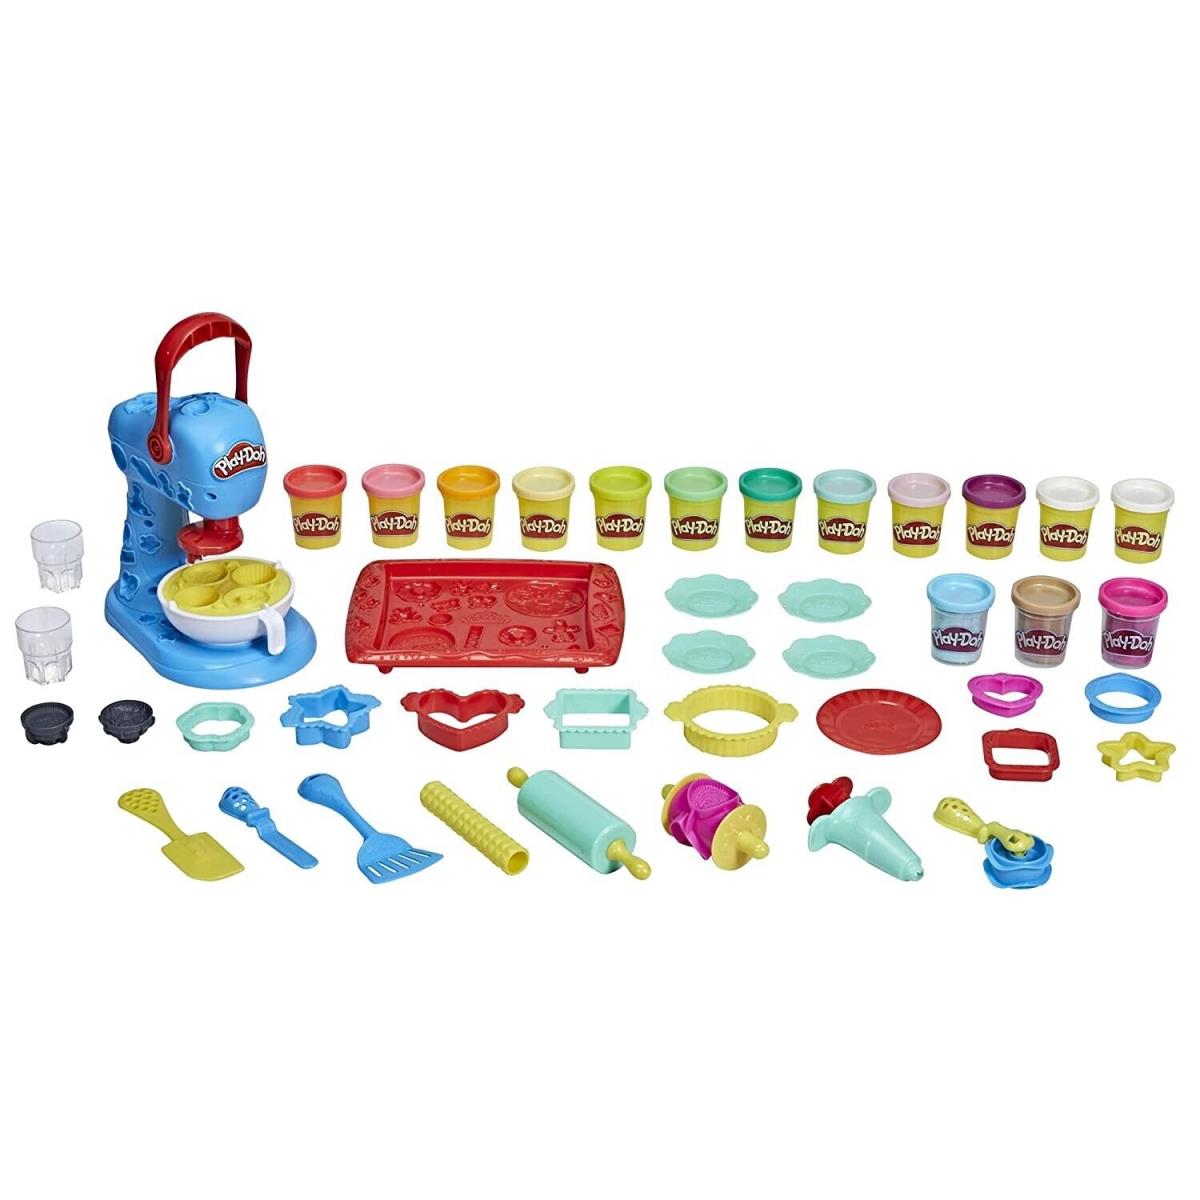 Play-doh Kitchen Creations Ultimate Cookie Baking Playset with Toy Mixer